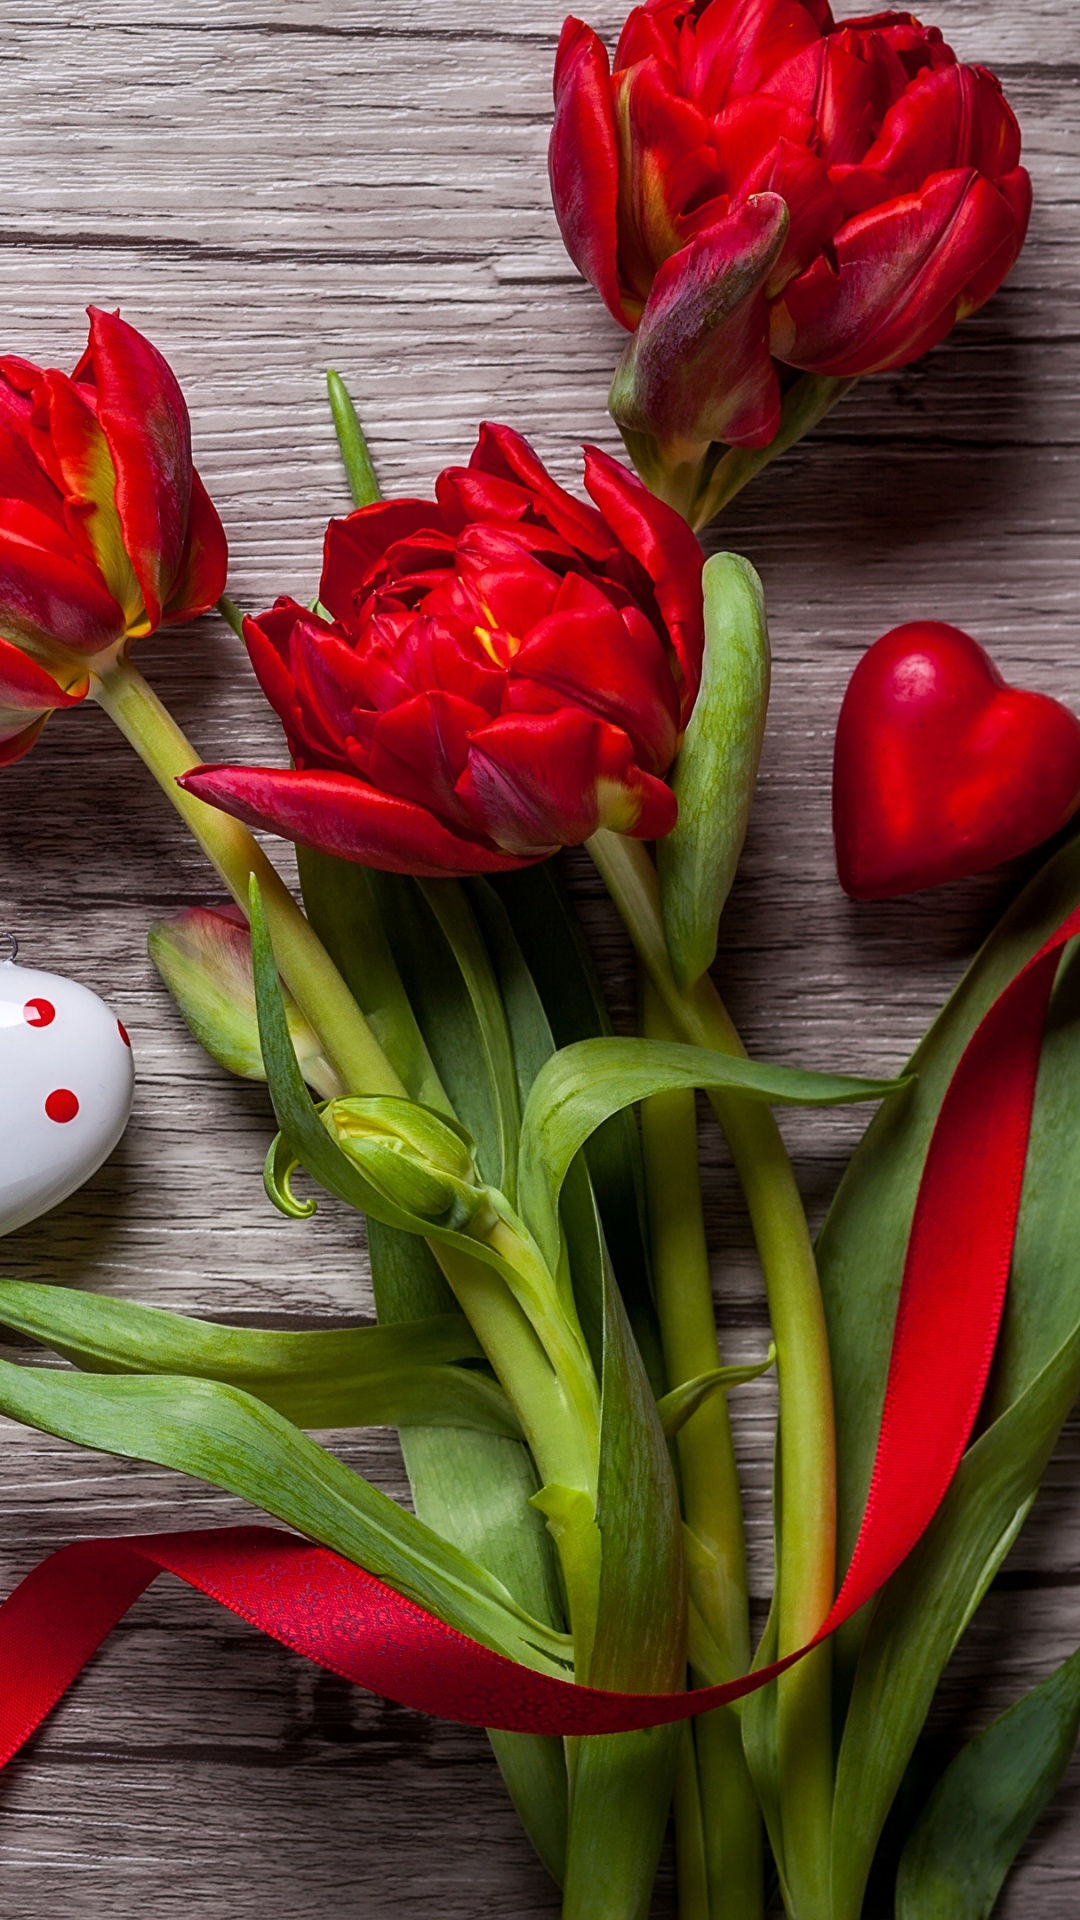 Red Tulips on Brown Wooden Surface. Wallpaper in 1080x1920 Resolution